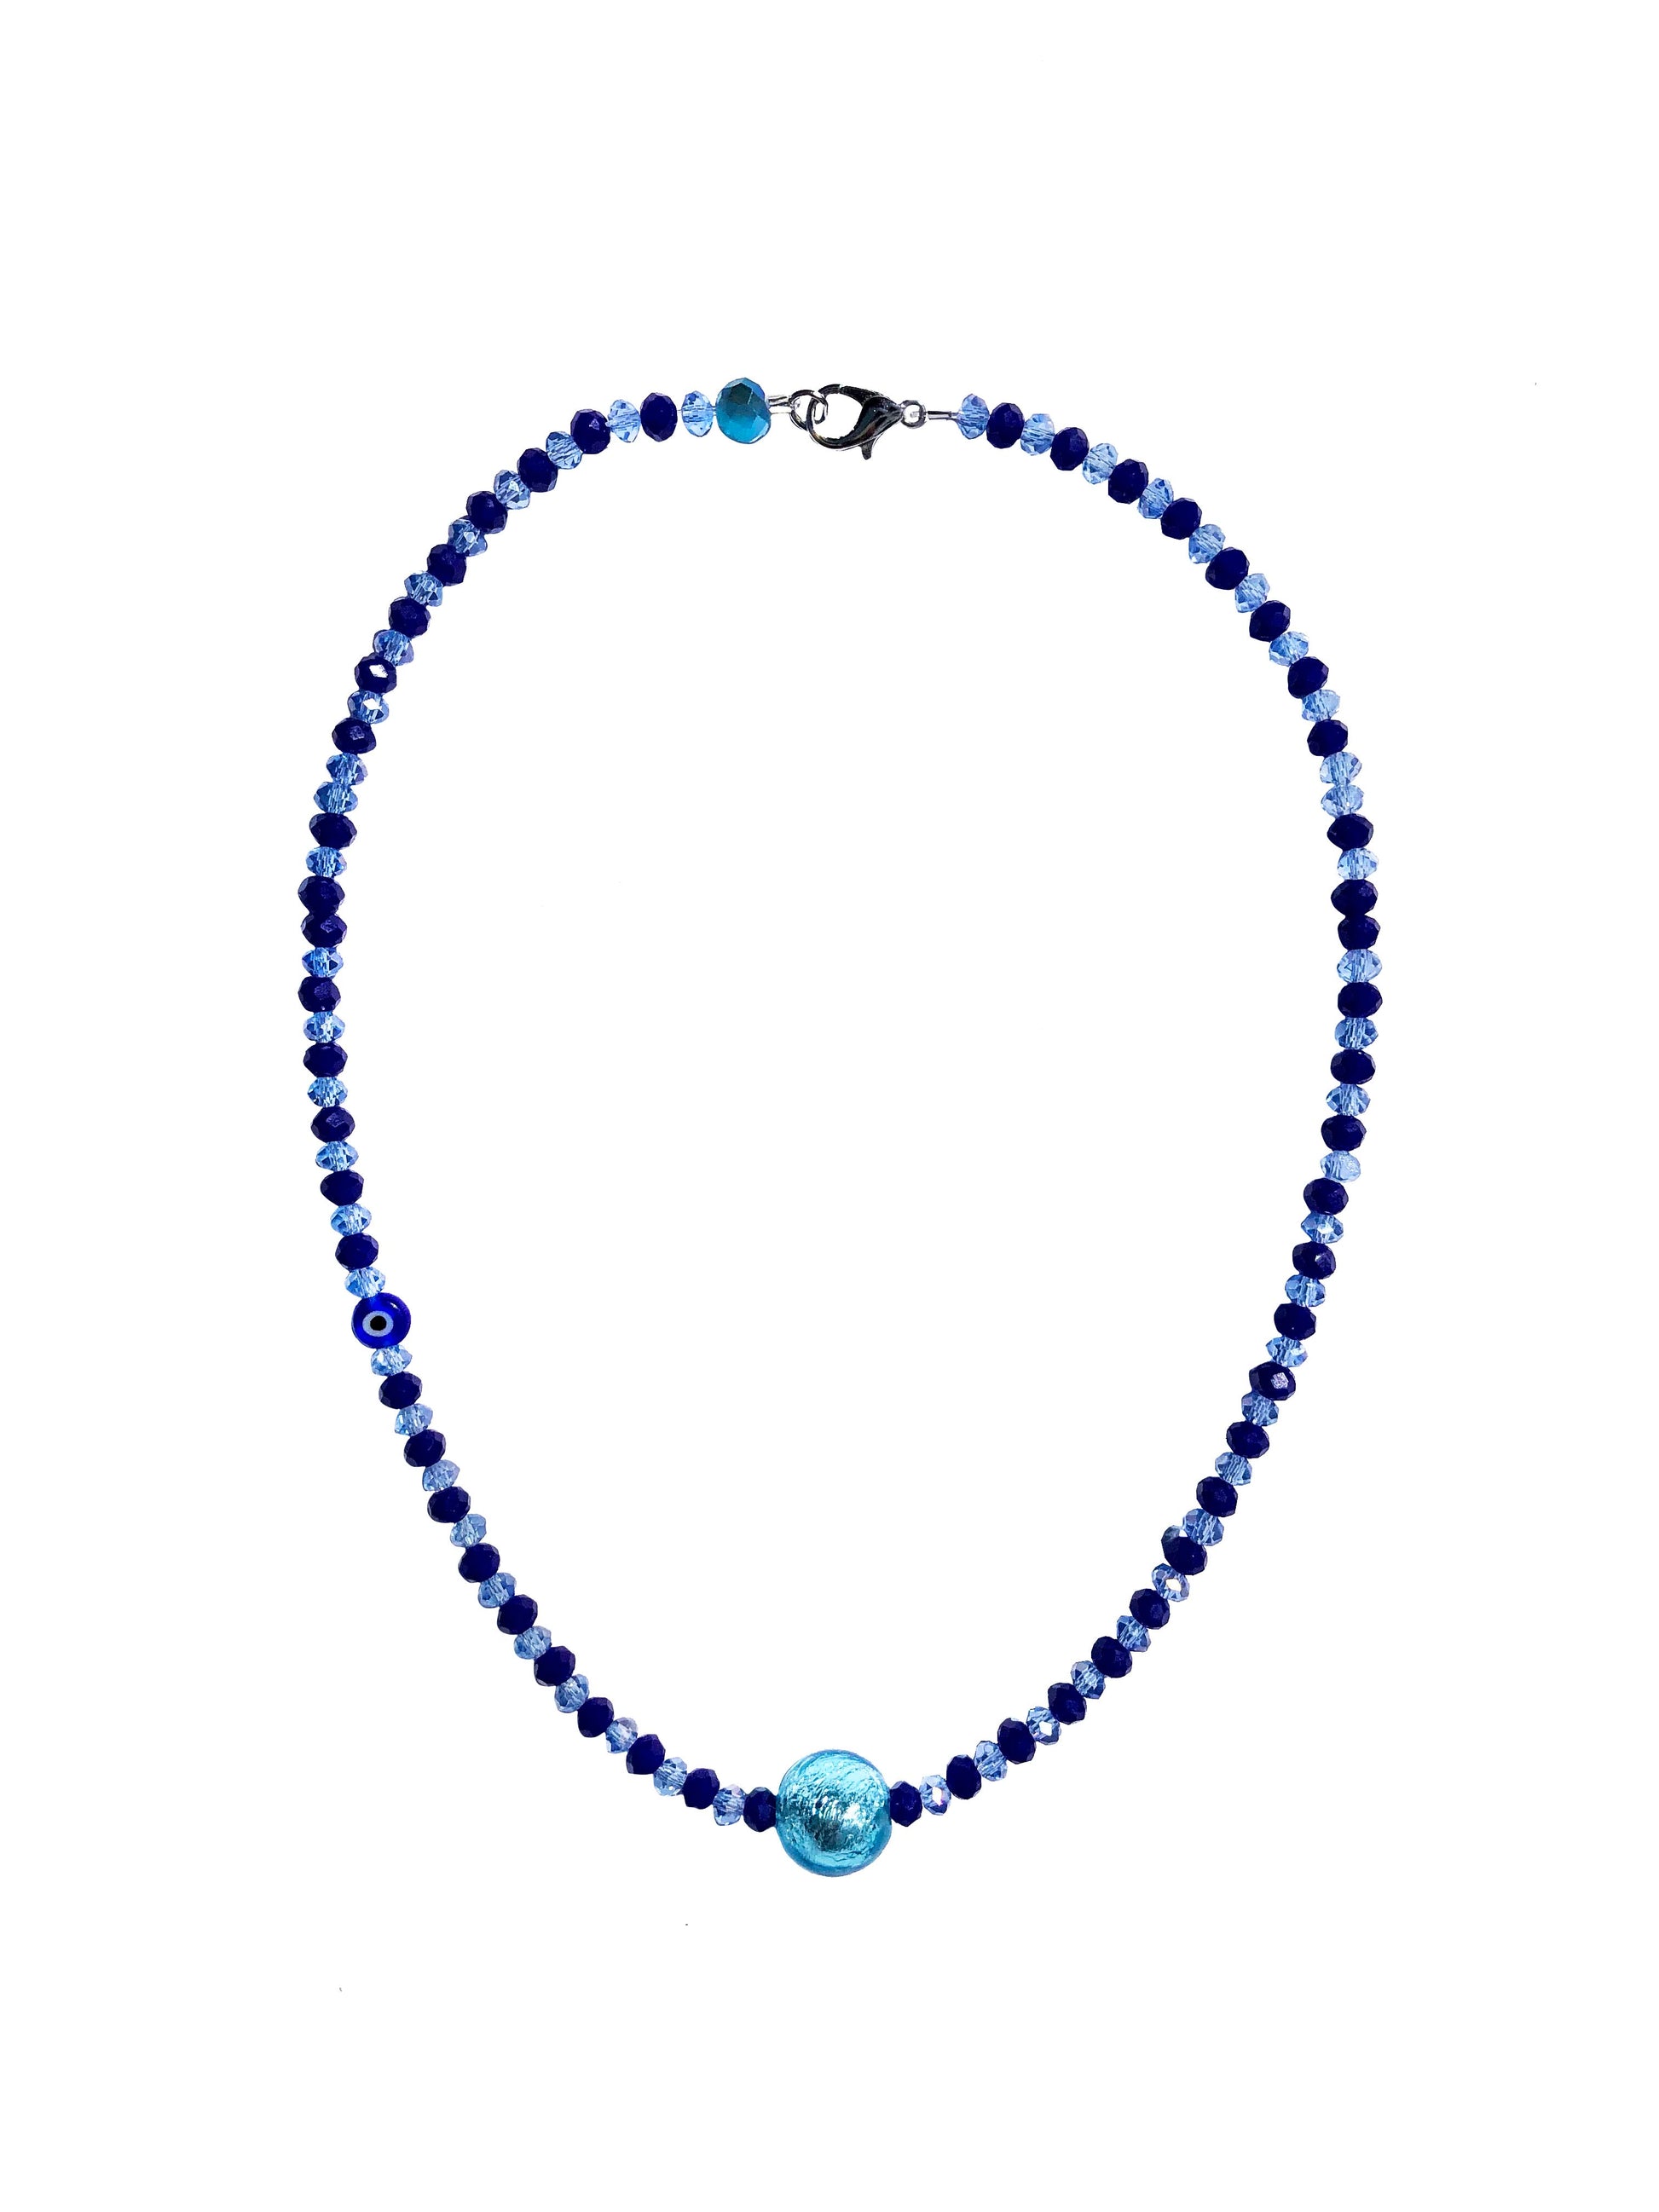 handcrafted blue crystal beaded necklace with an evil eye and paper mache charm